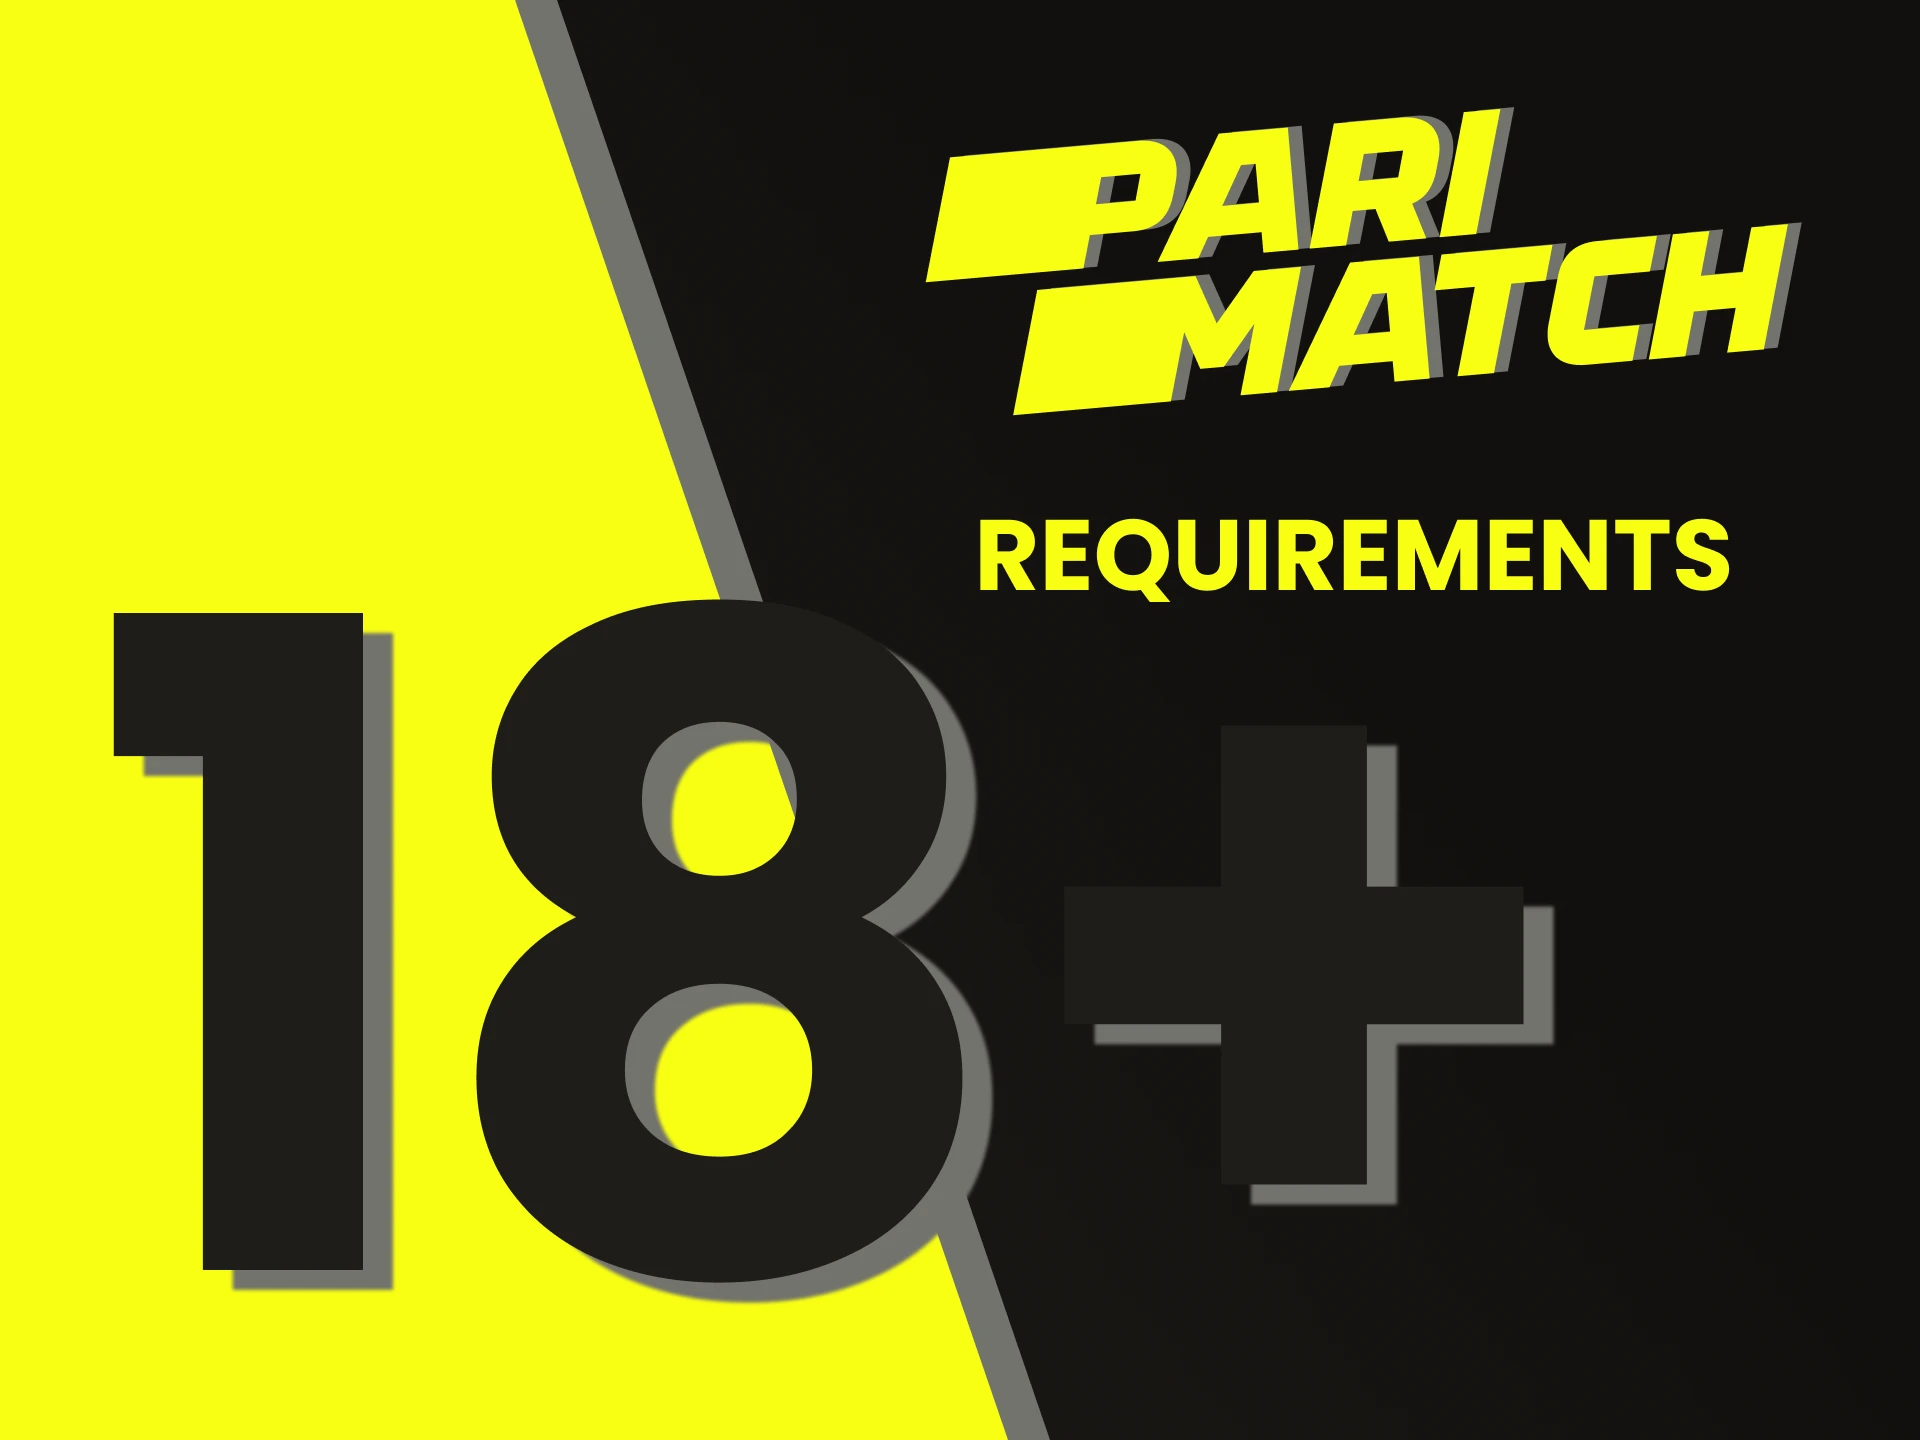 We will tell you about the requirements for registering on Parimatch.